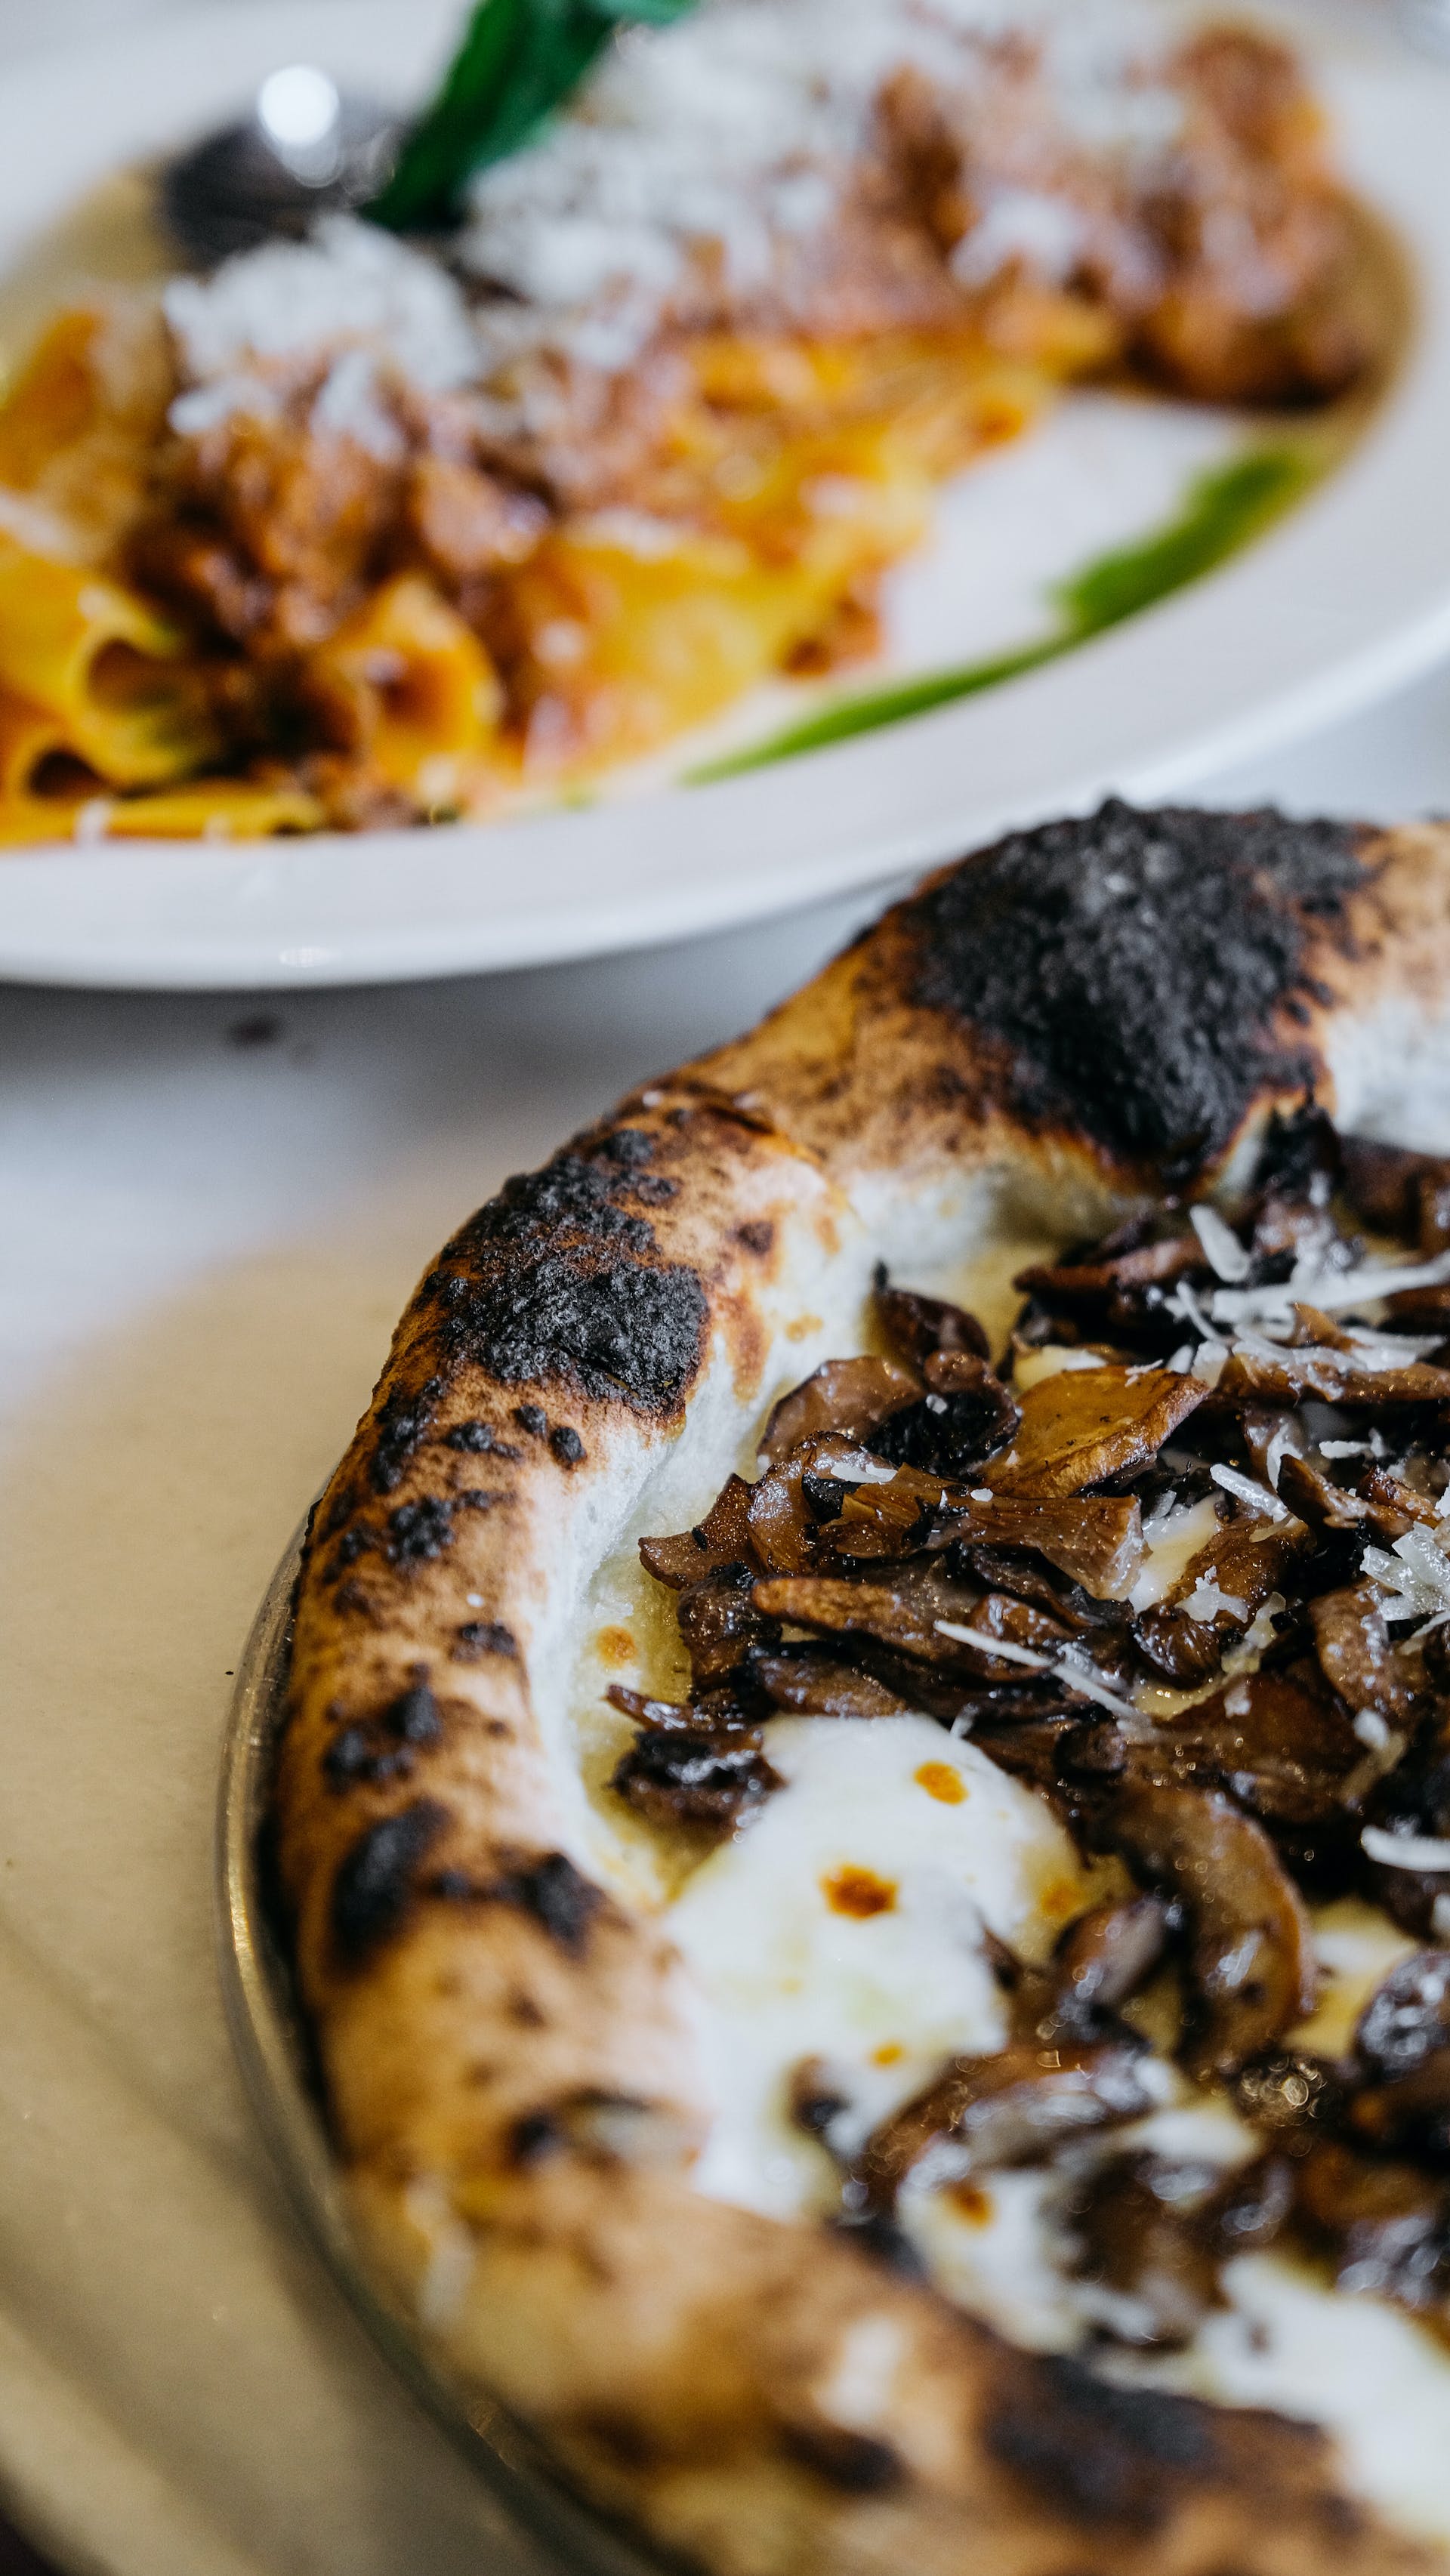 A pizza with burnt edges | Source: Pexels